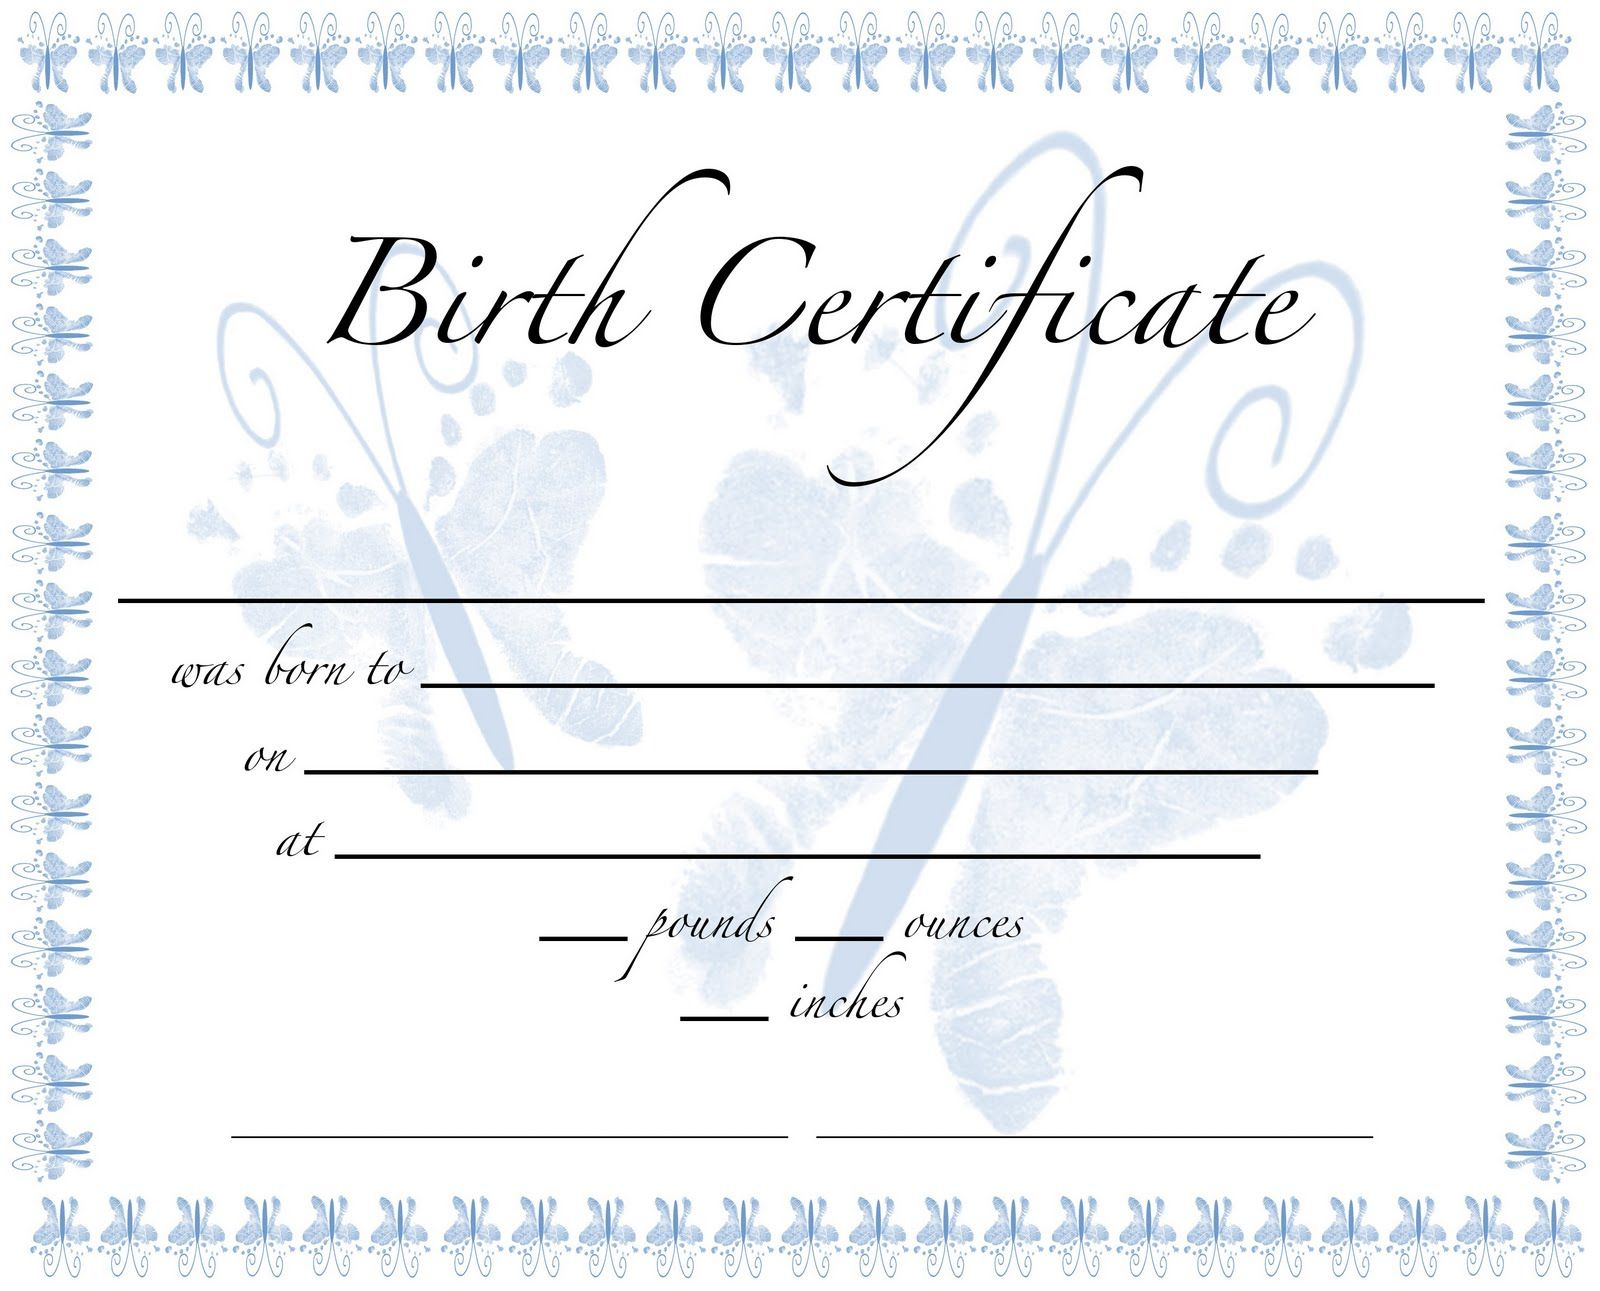 Pics For Birth Certificate Template For School Project Regarding Certificate Templates For School